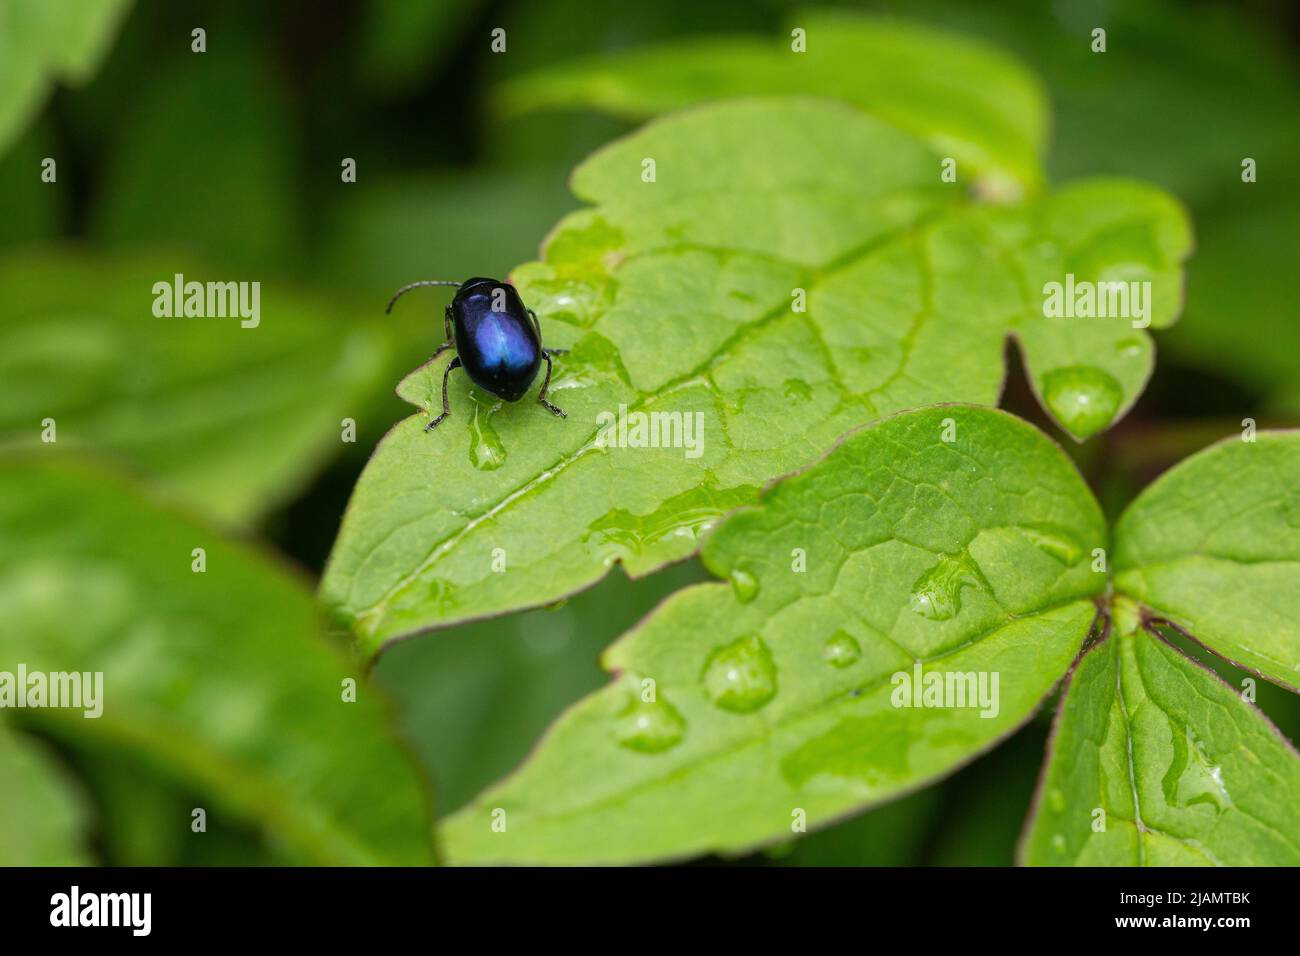 Blue Mint Beetle - Chrysolina Coerulans - on a clematis leaf. Stock Photo